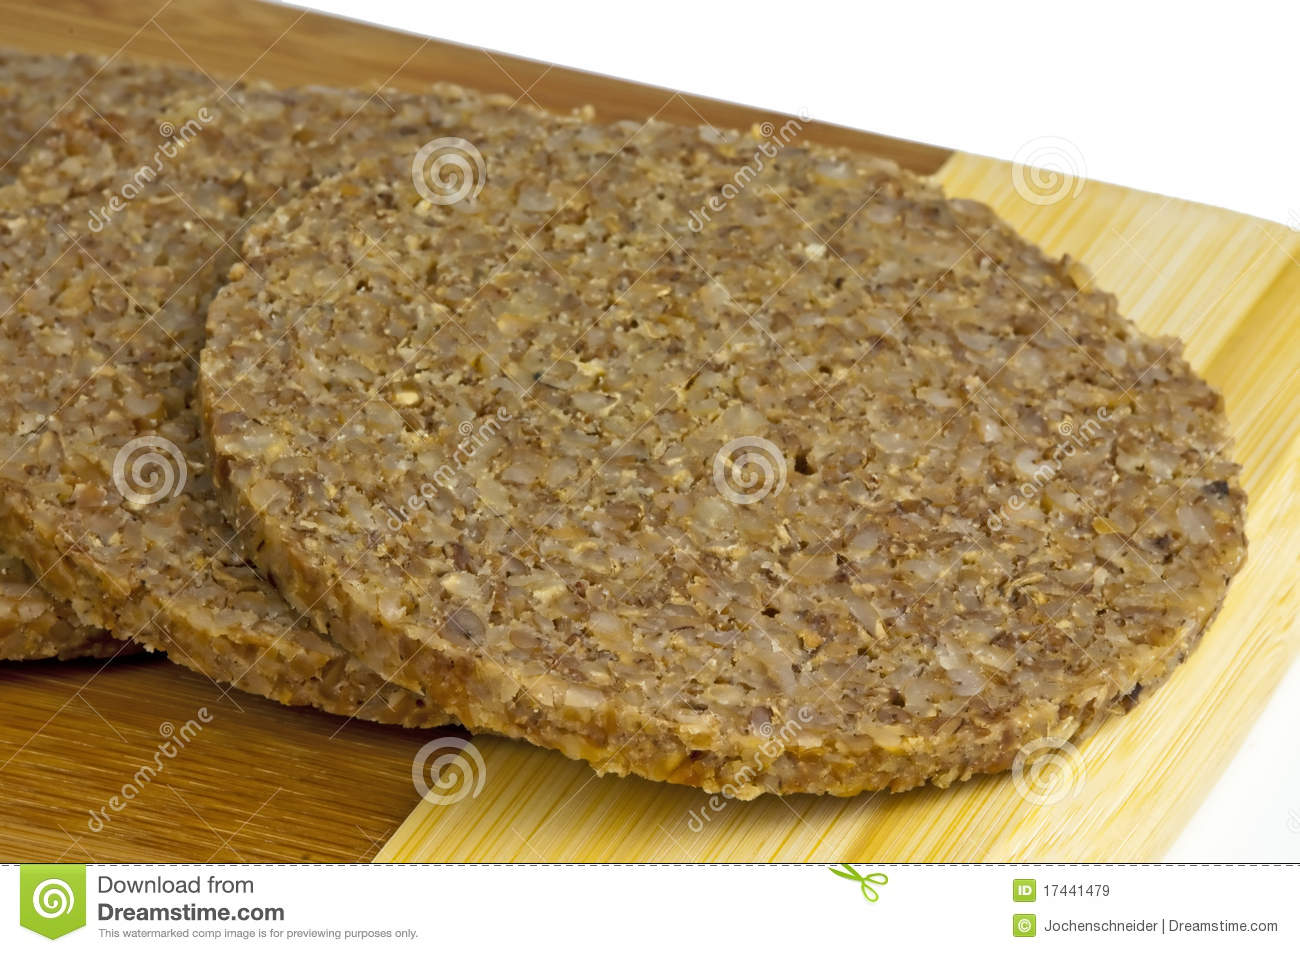 Whole Grain Bread Royalty Free Stock Images   Image  17441479